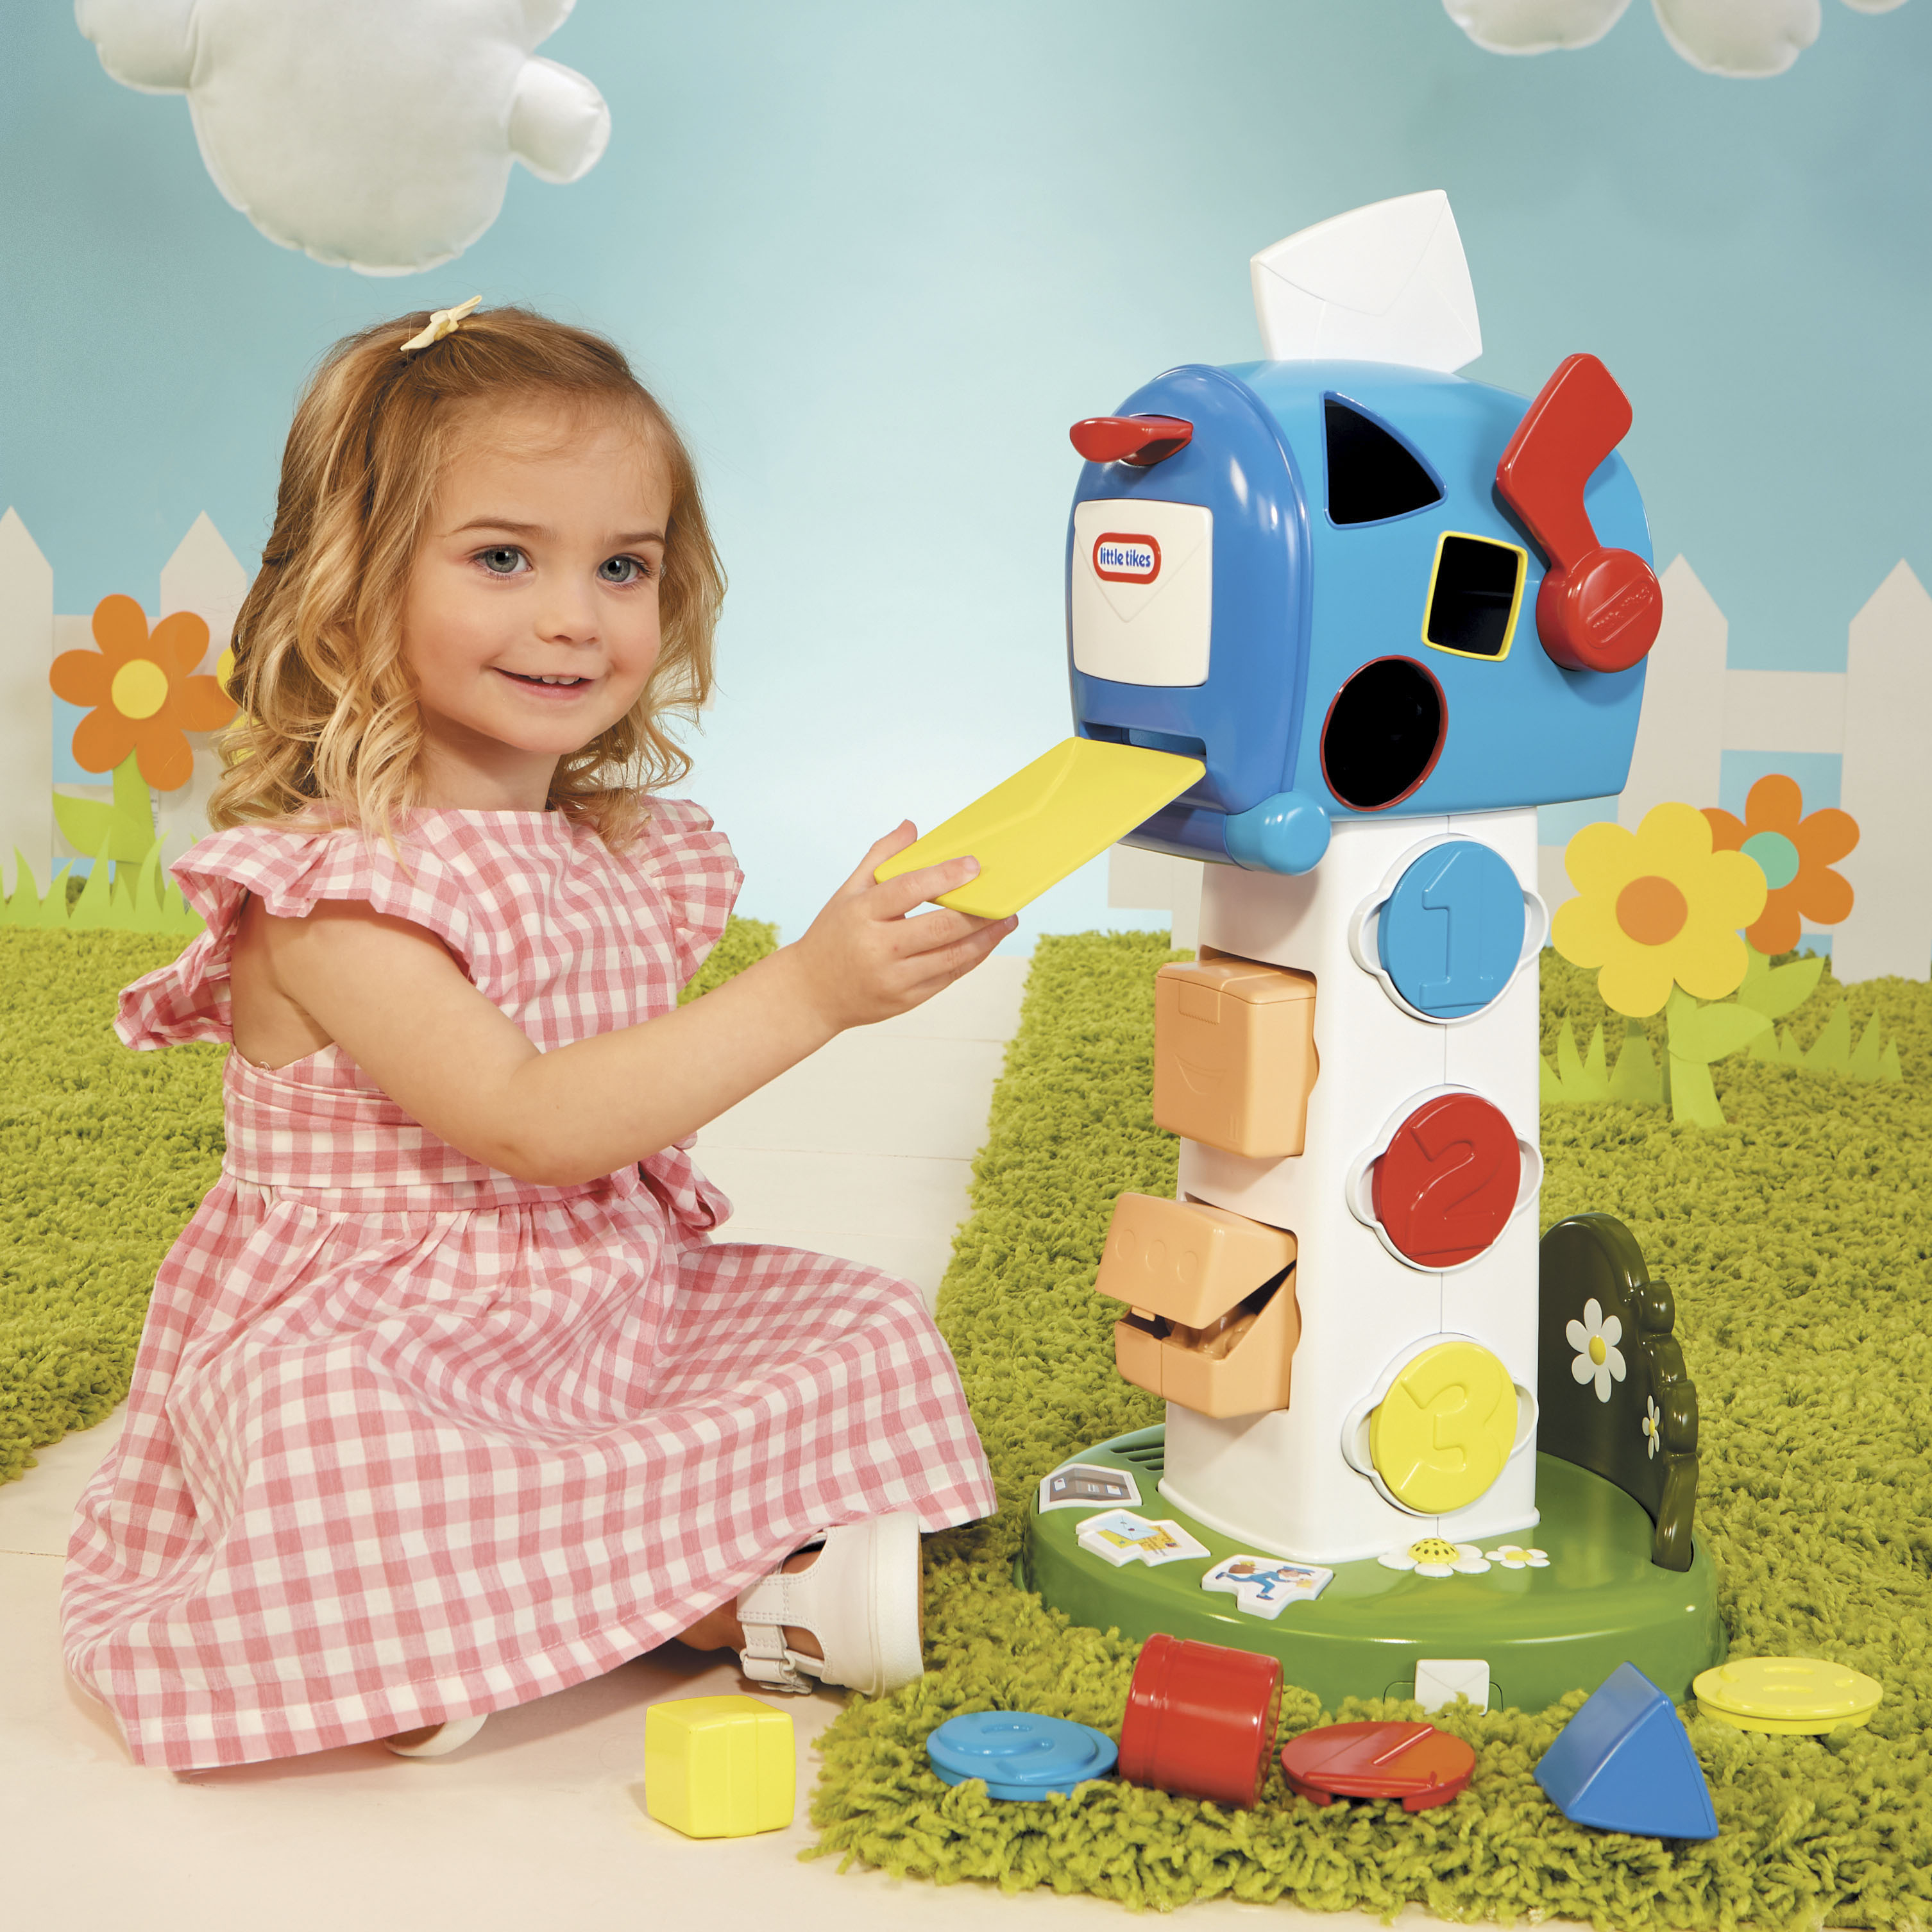 Left View: Little Tikes Learn & Play My First Mailbox, Pretend Mailbox Playset for Learning Shapes, Numbers, and Colors - for Ages 1 -3 Years